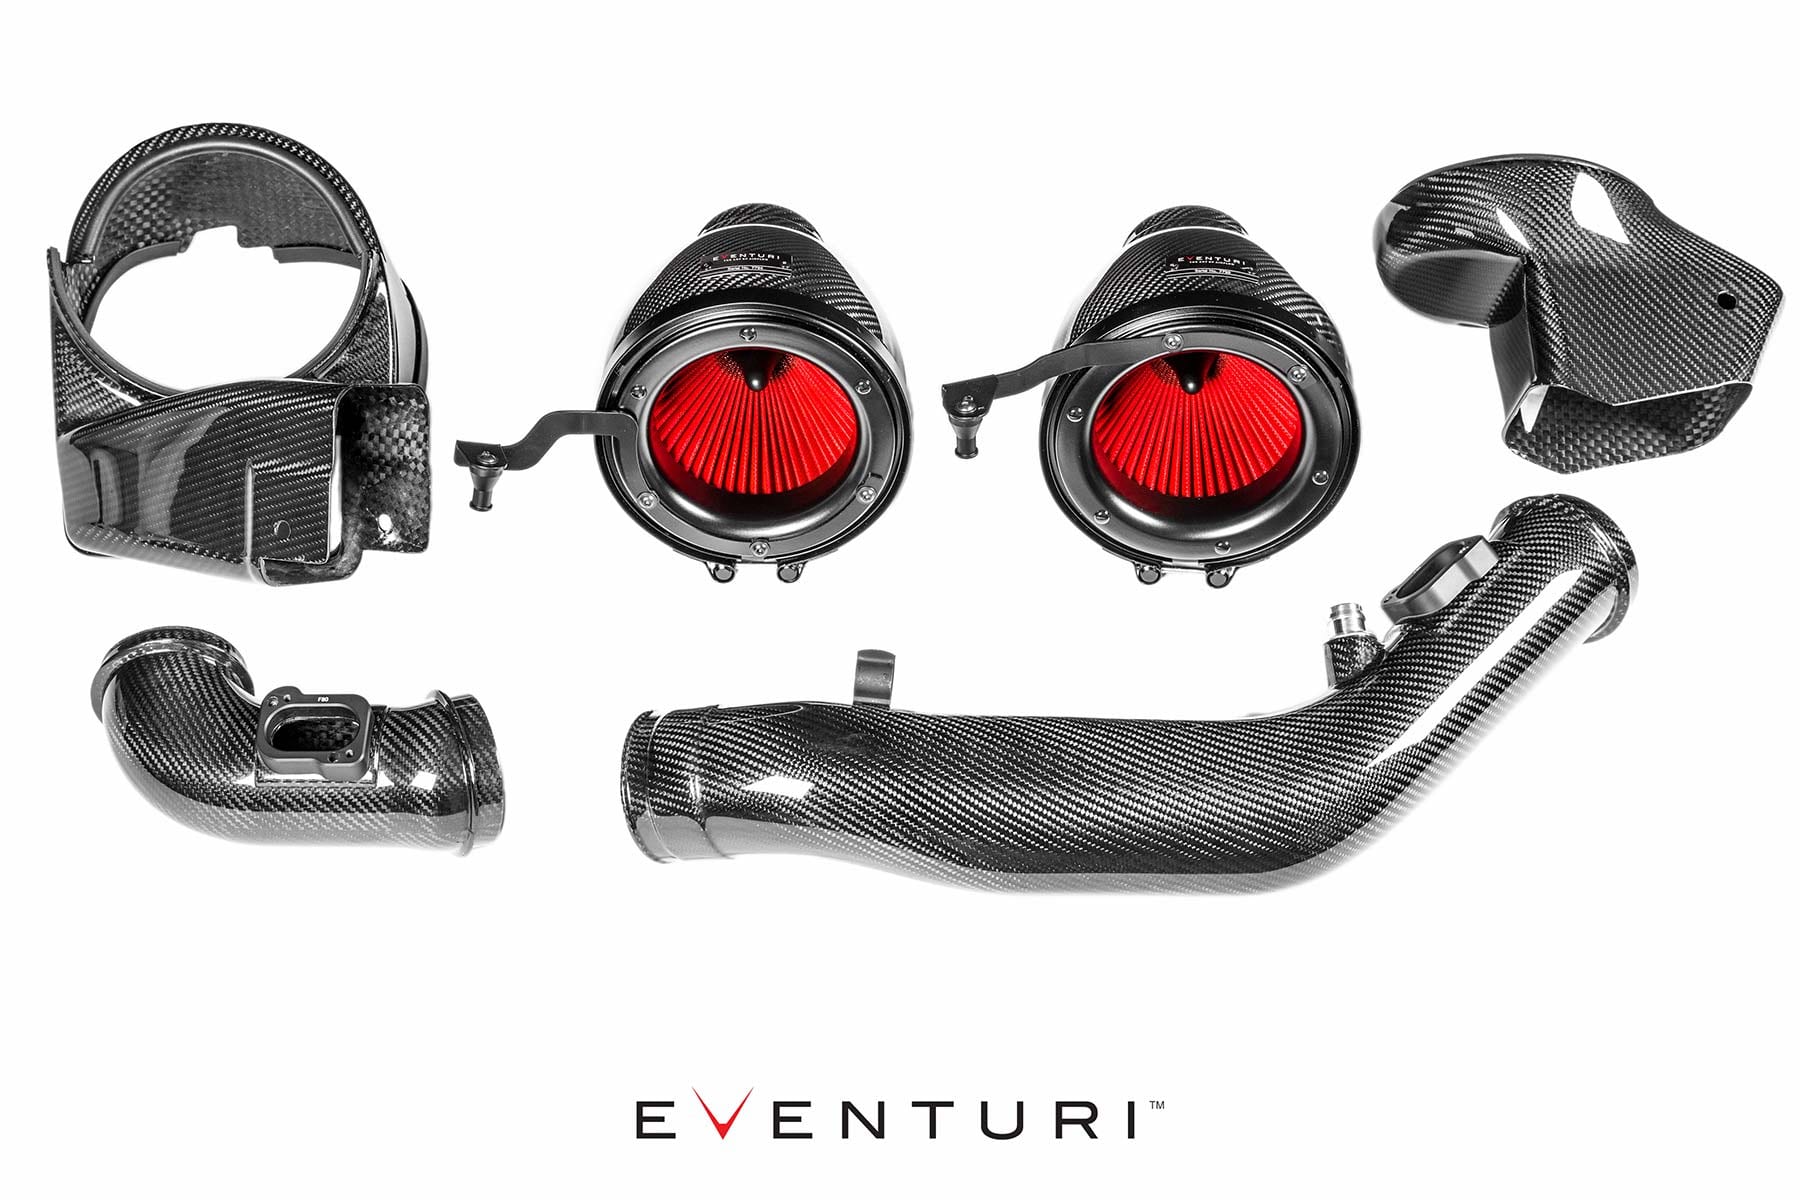 Eventuri Carbon Air Intakes for BMW and BMW M cars